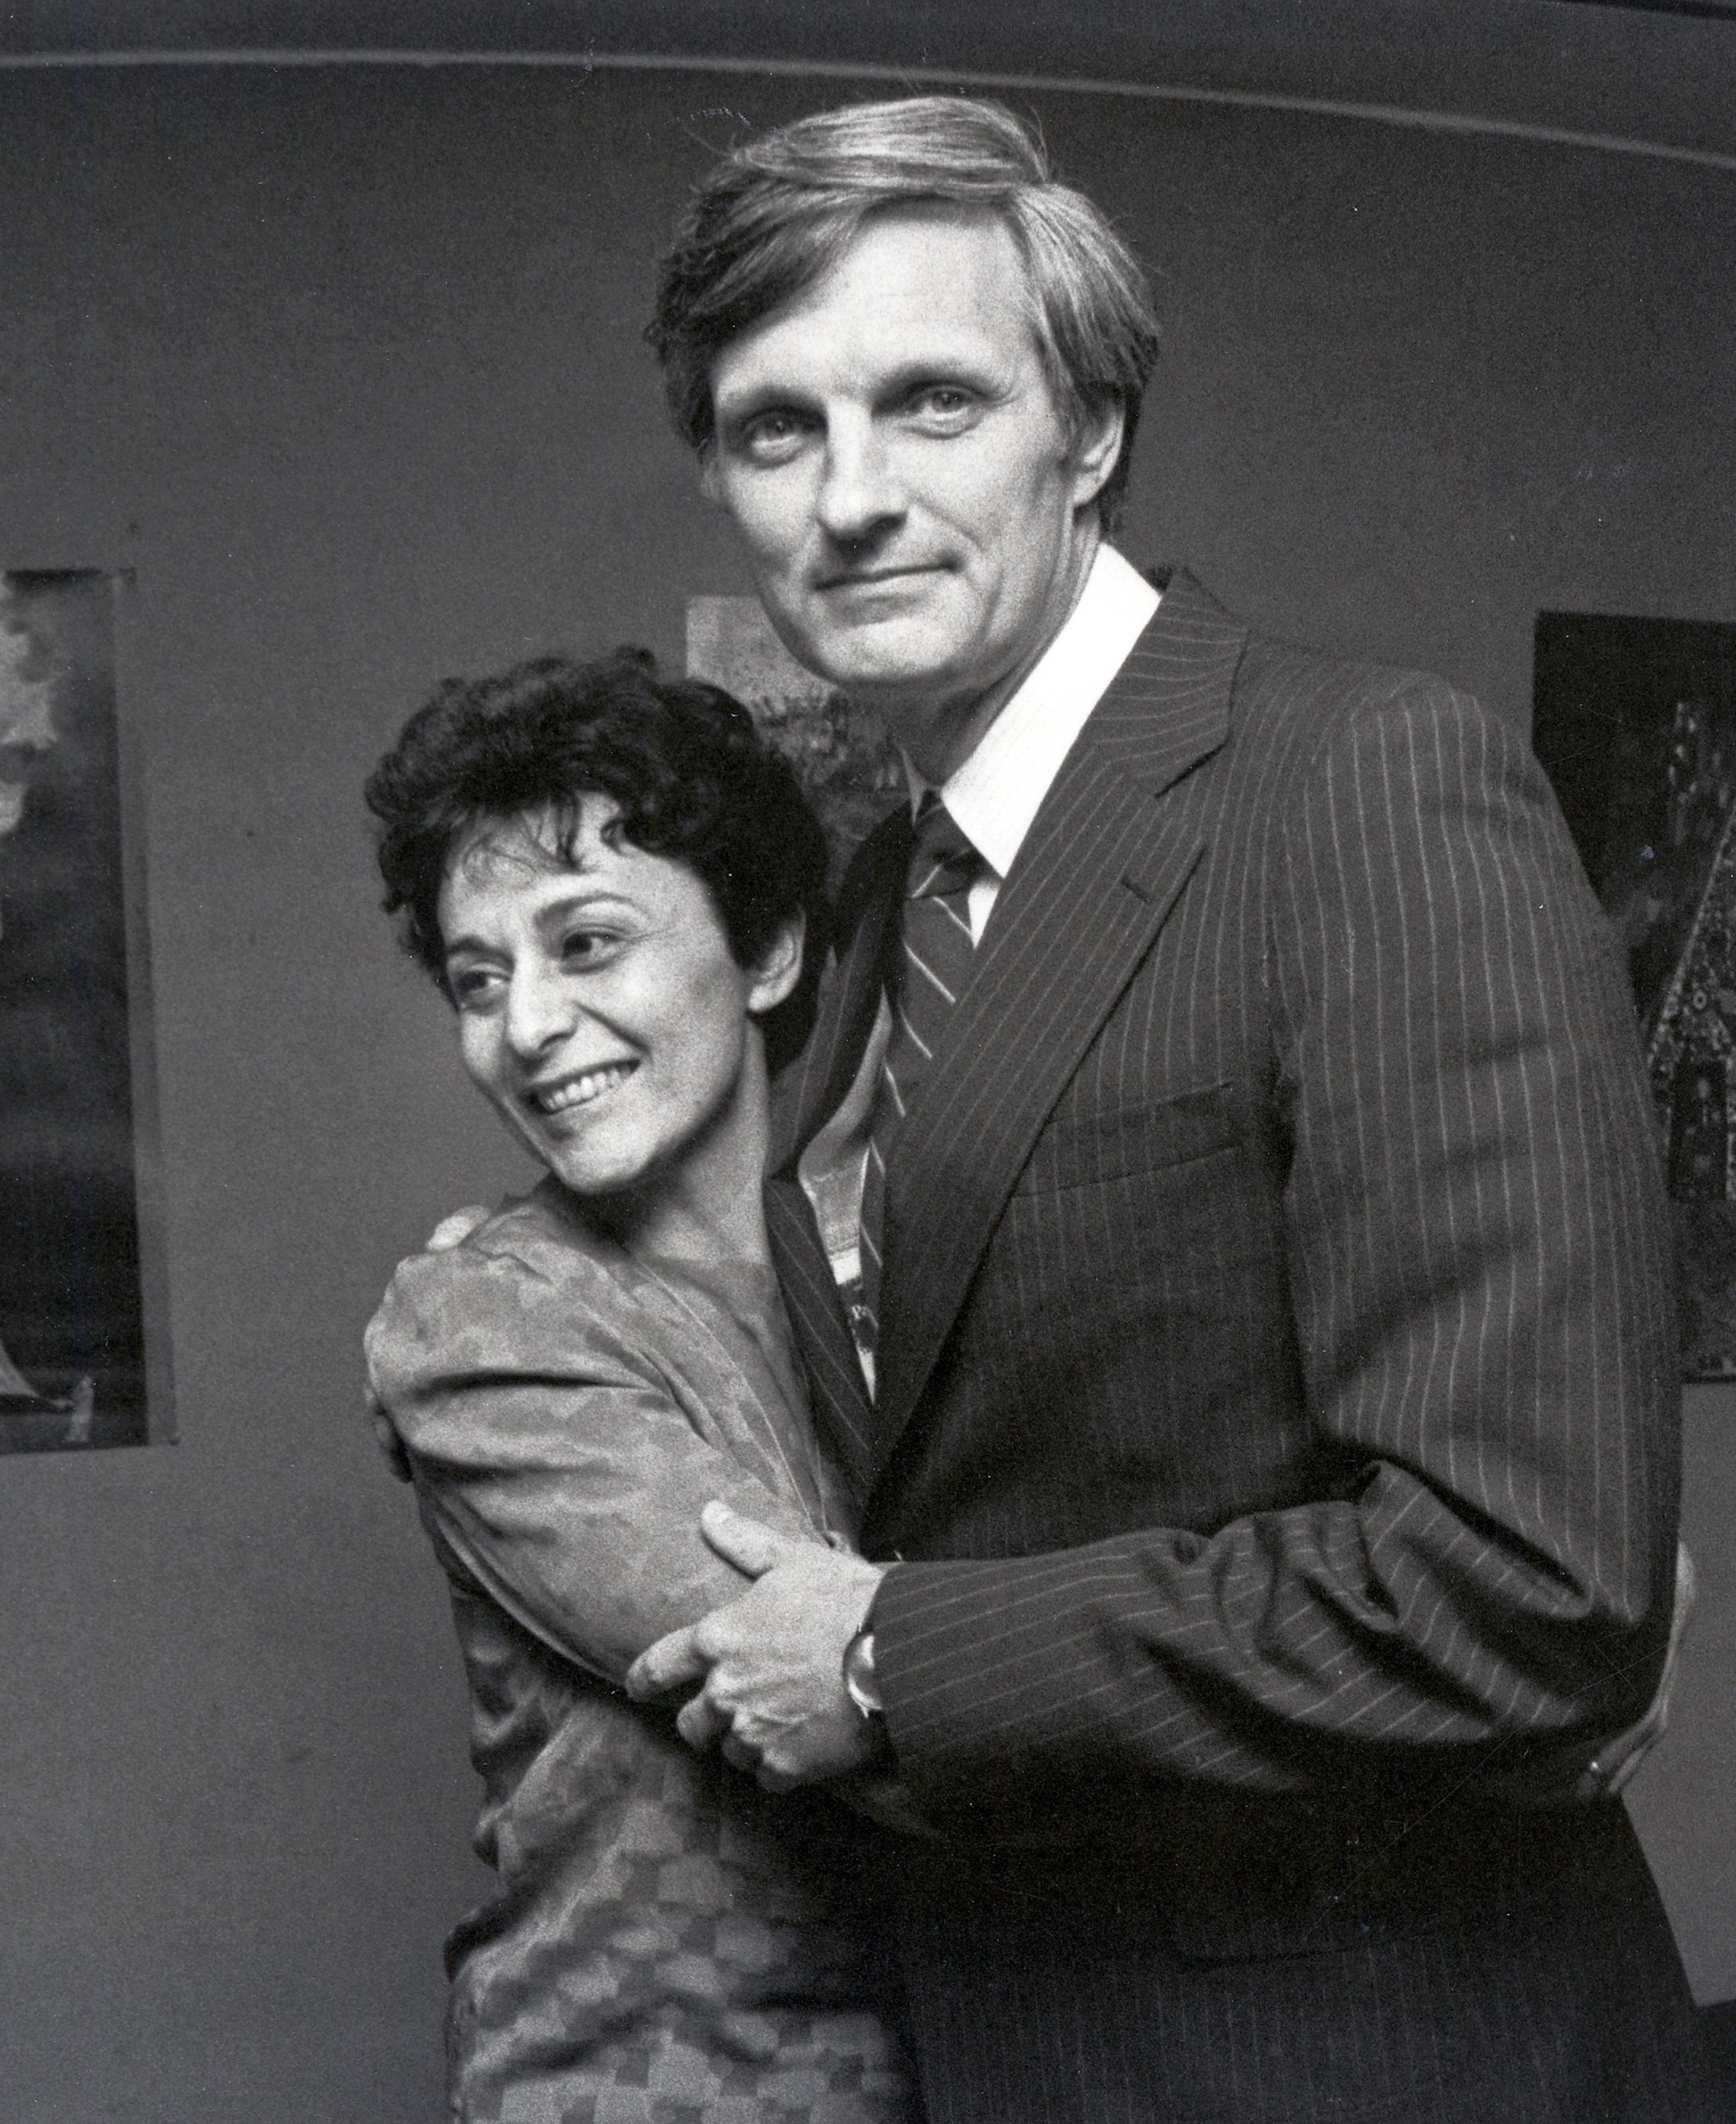 Arlene Alda and Alan Alda during "The Four Seasons" New York Premiere Press Party in New York City, in 1981 | Source: Getty Images